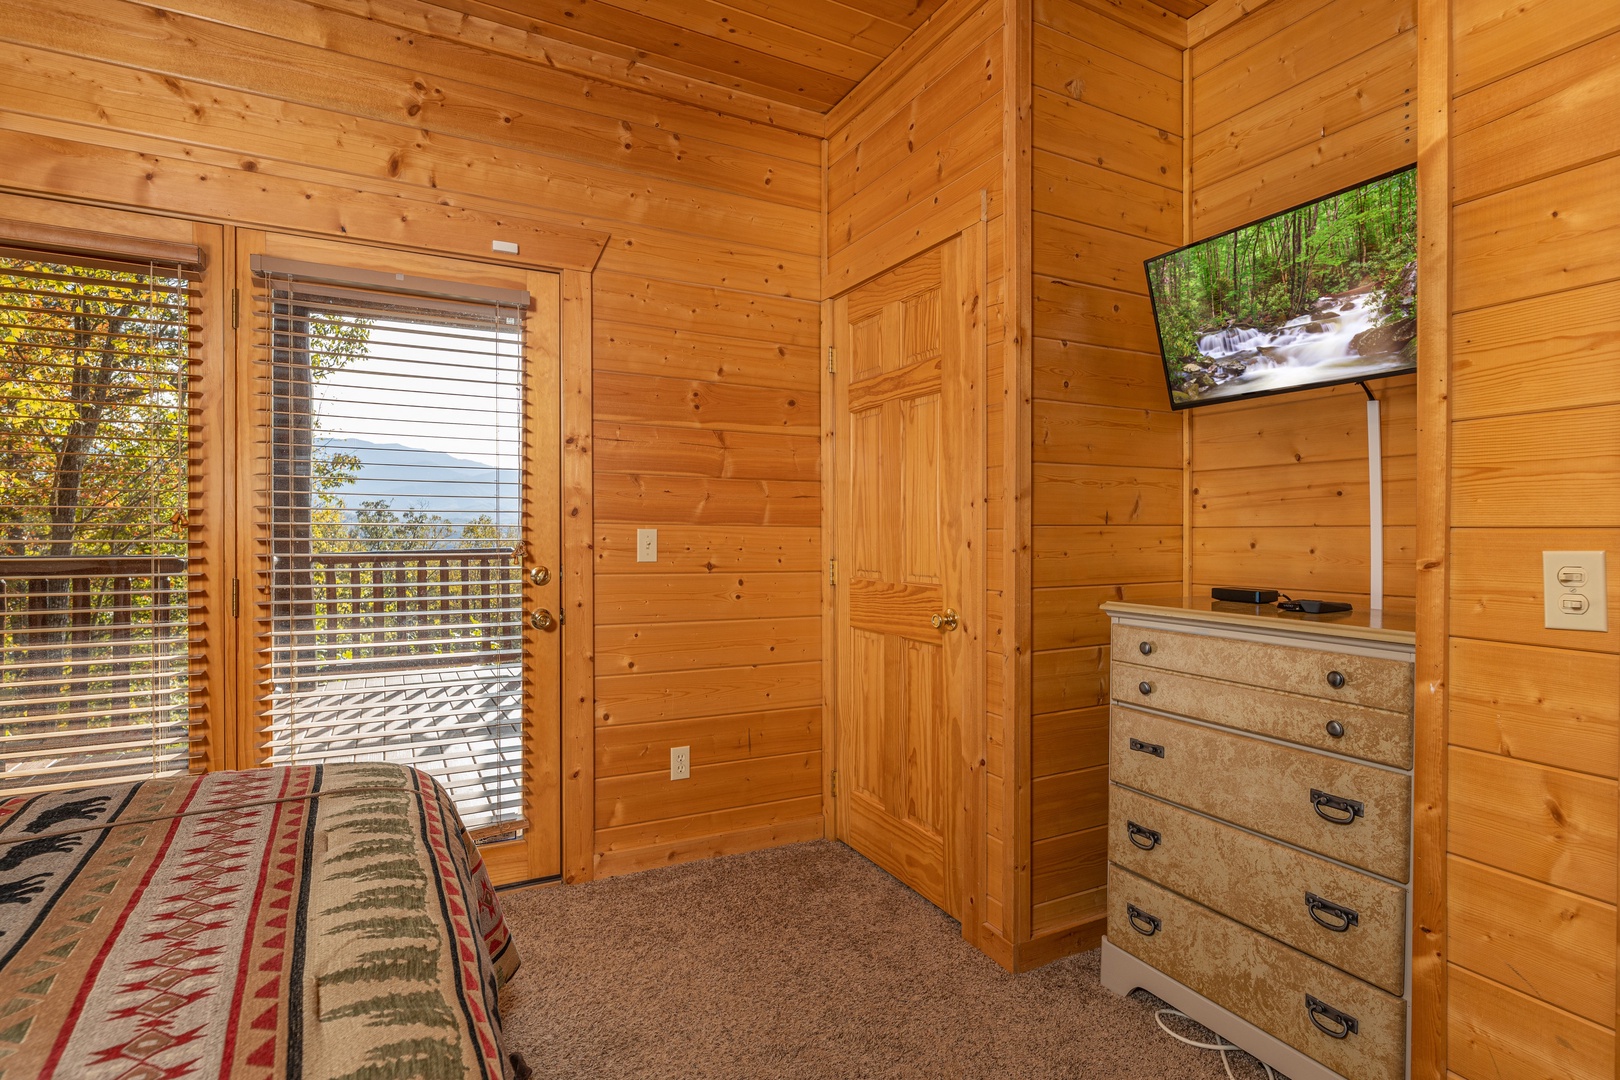 Dresser, TV, and deck access in a bedroom at Grizzly's Den, a 5 bedroom cabin rental located in Gatlinburg